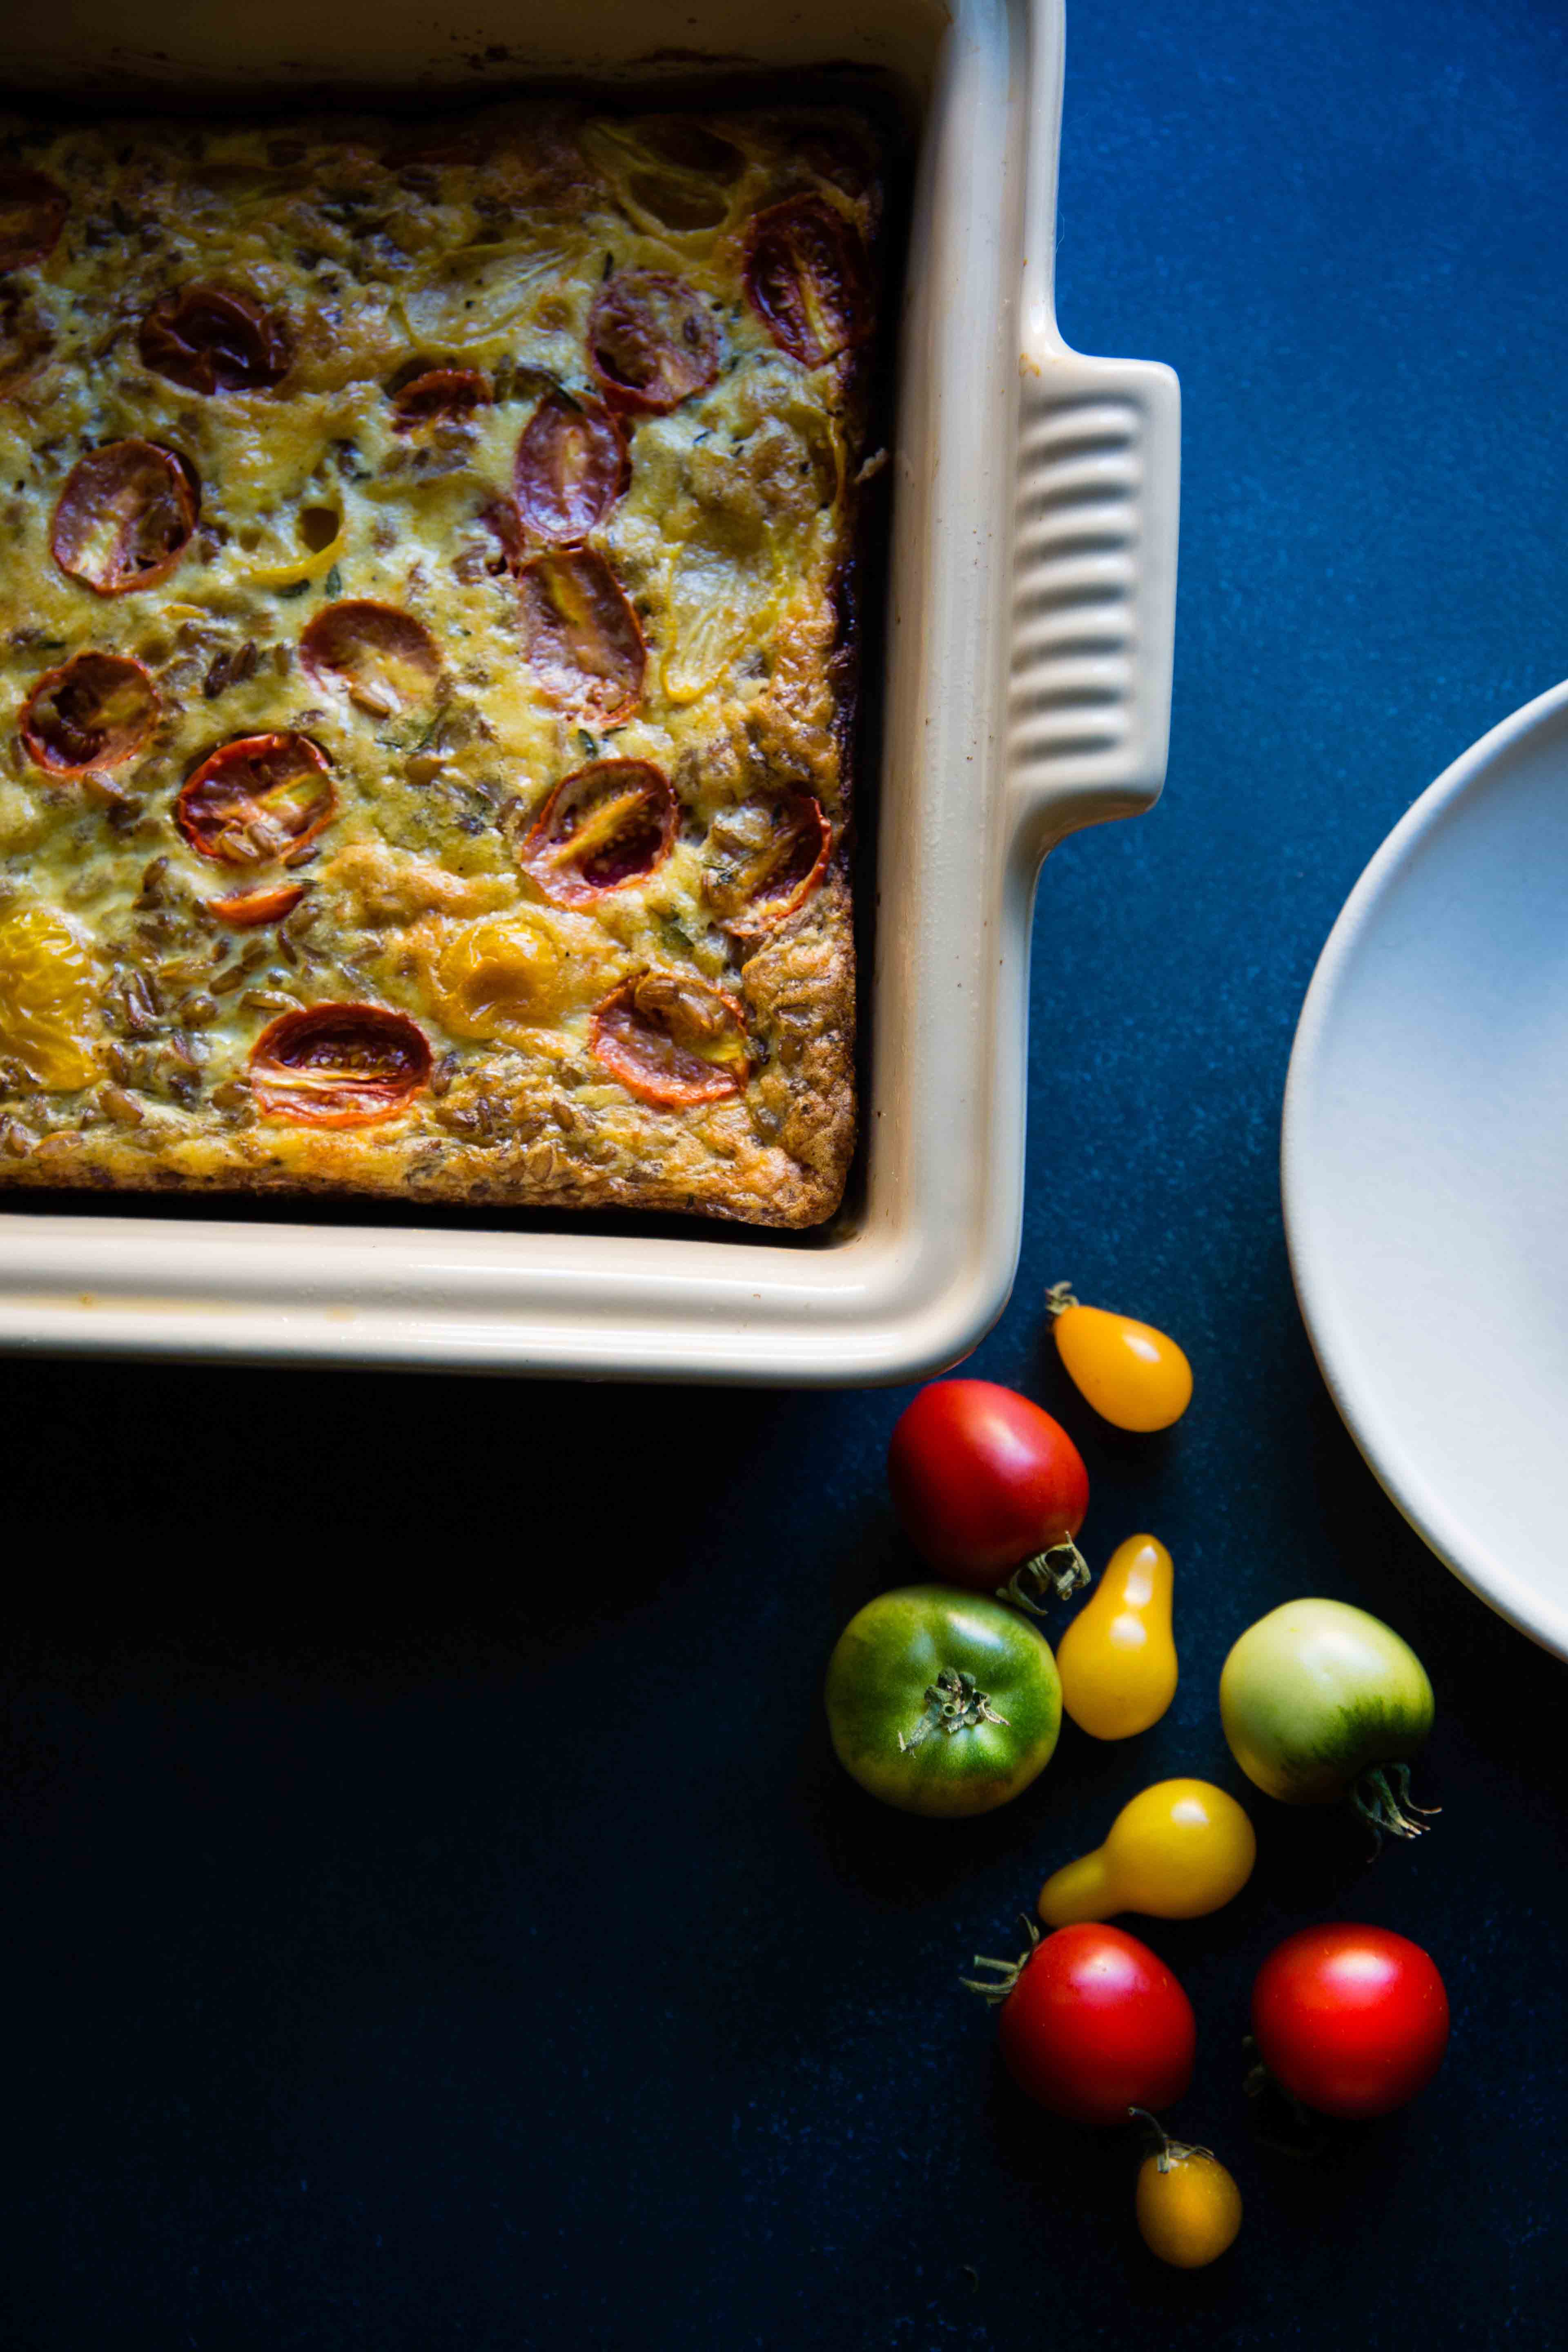 Winter mornings call for something hearty like Tomato Rye Berry Breakfast Casserole.